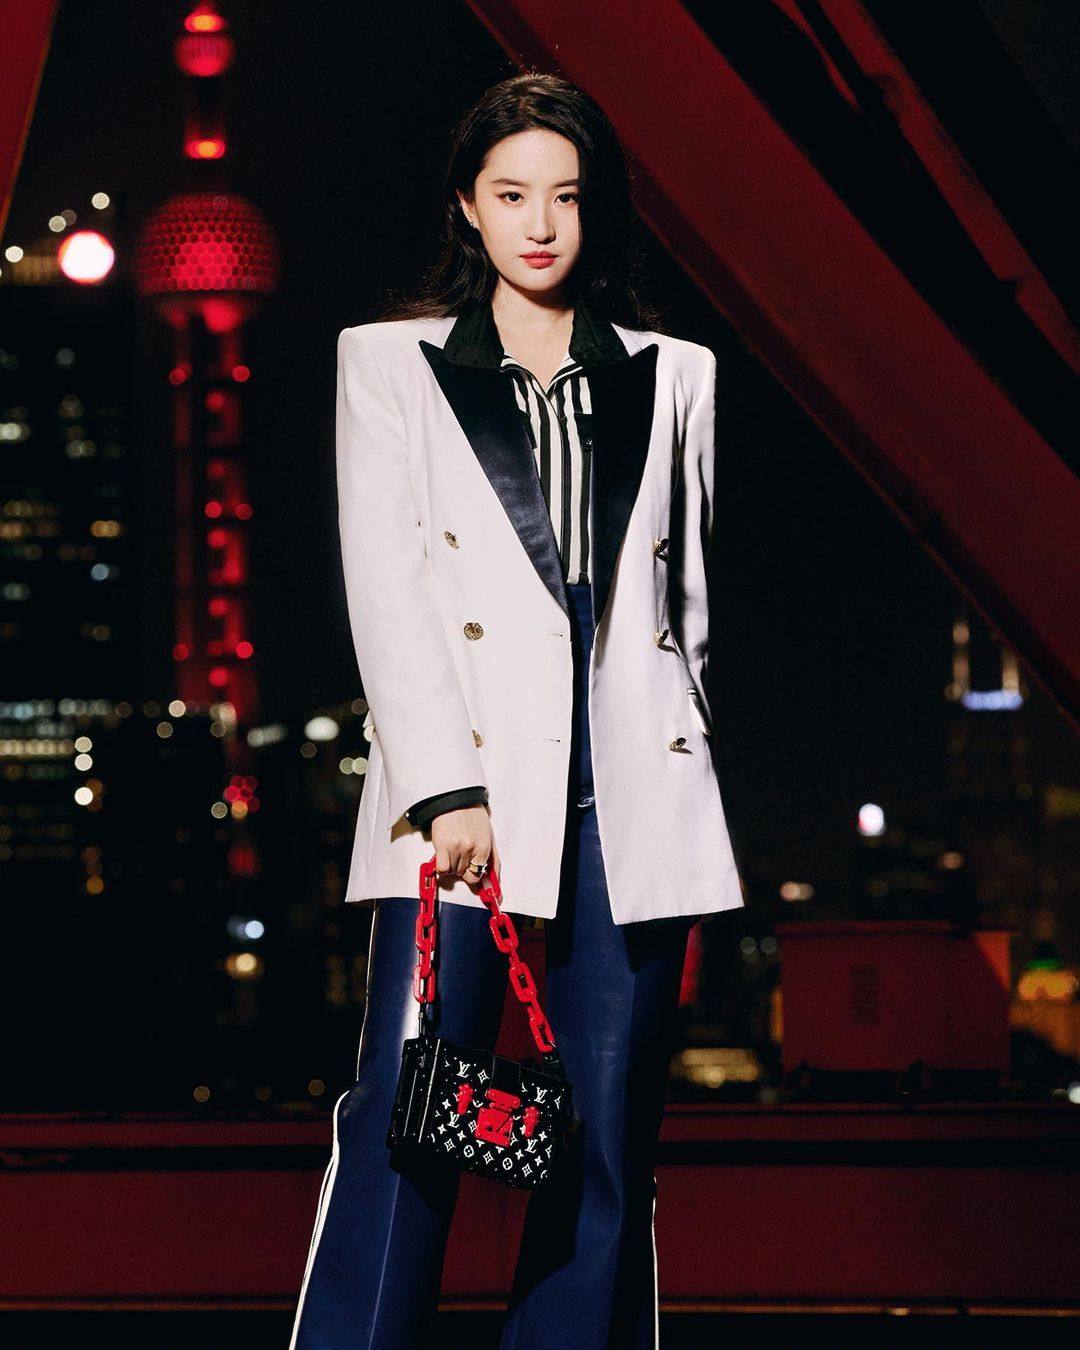 Over the years, Chinese actress Liu Yifei has endorsed numerous luxury brands, from Louis Vuitton (pictured) to Tissot. Photo: @louisvuitton/Instagram